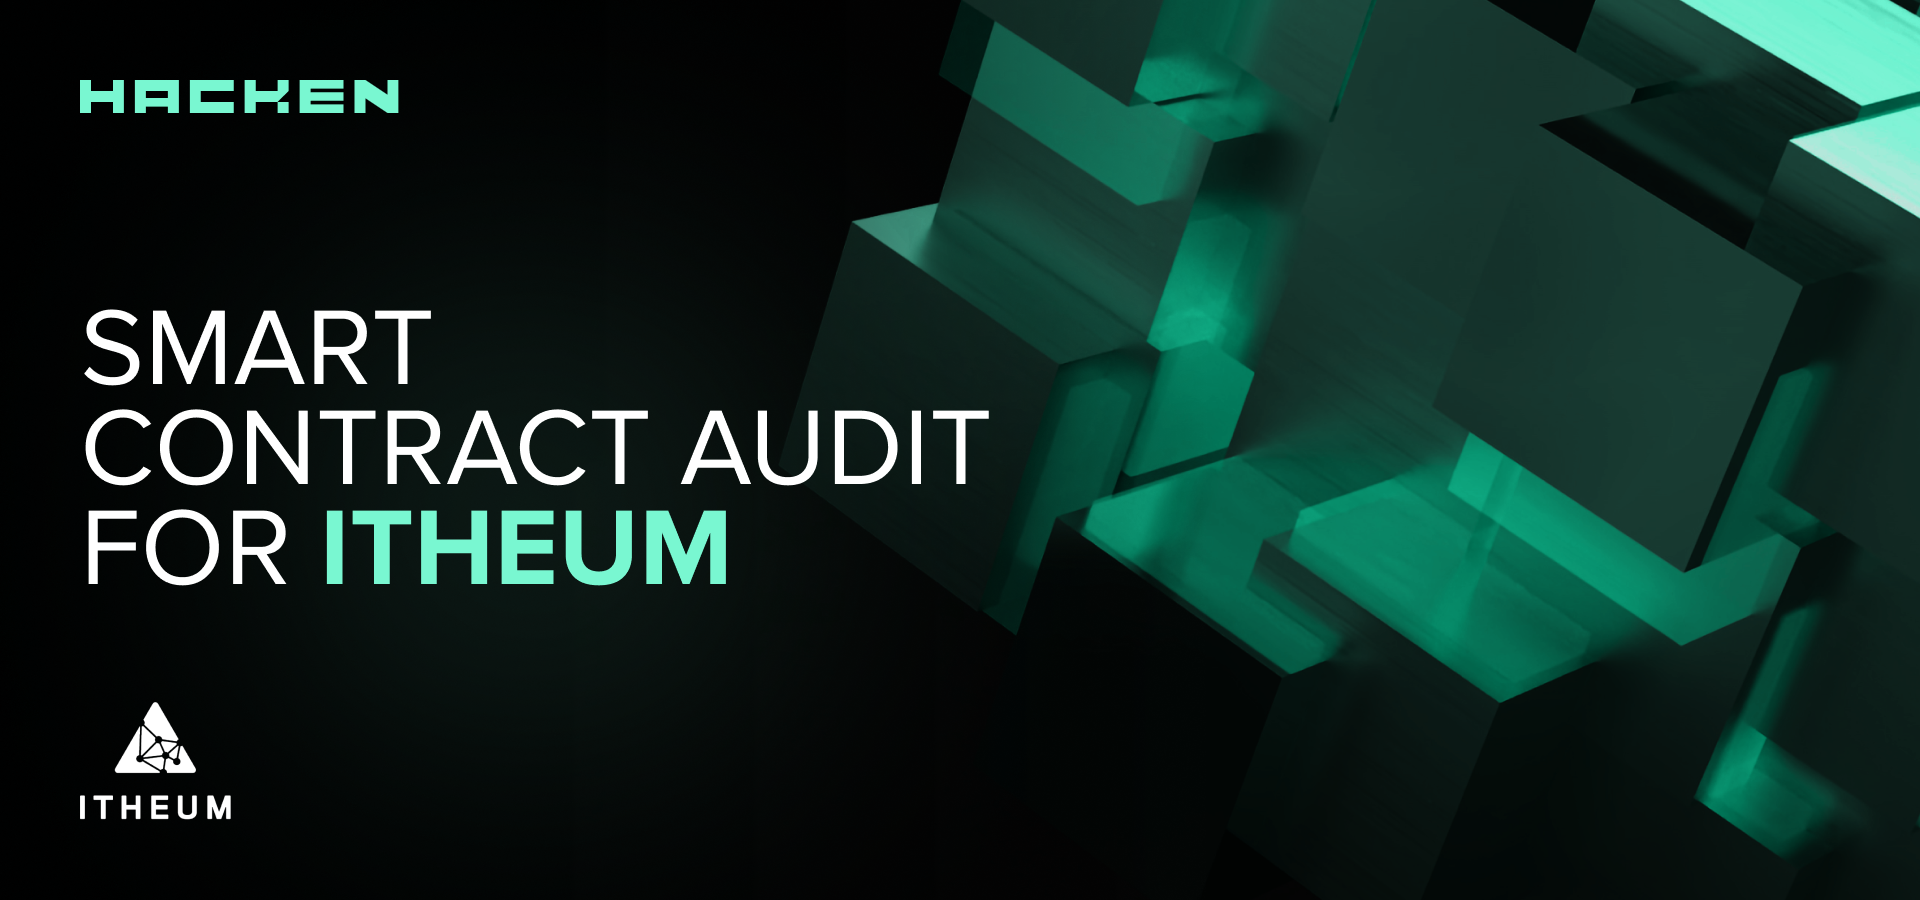 Smart Contract Audit for Itheum